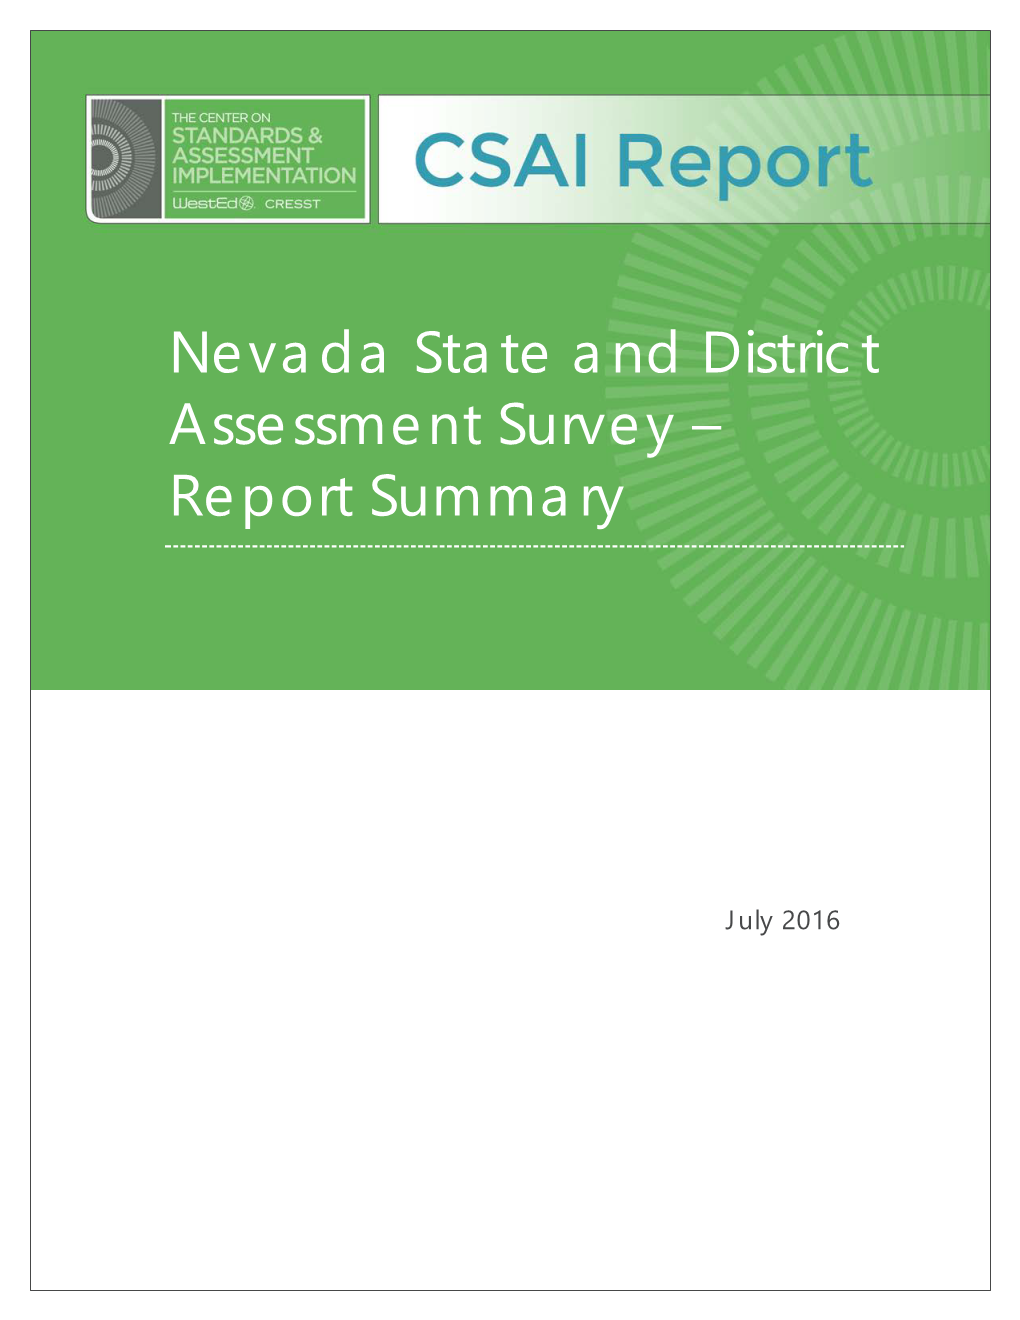 Nevada State and District Assessment Survey – Report Summary